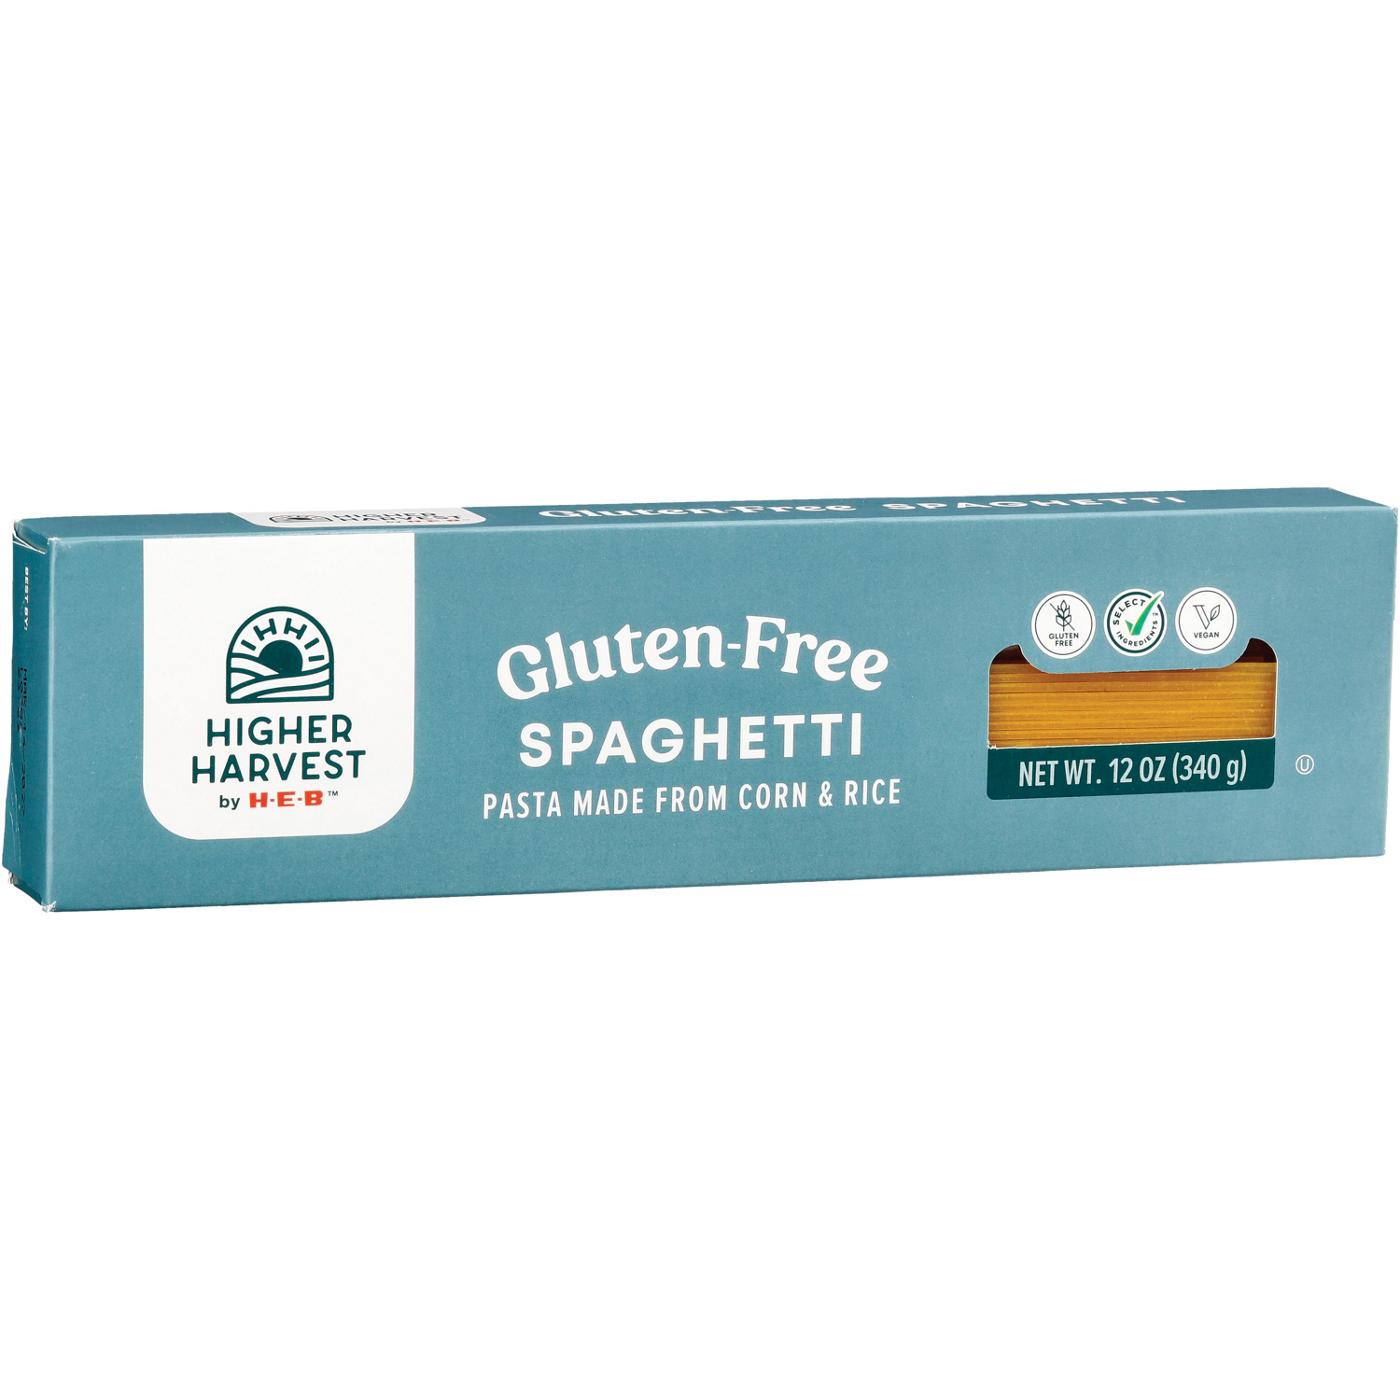 Higher Harvest by H-E-B Gluten-Free Spaghetti Noodles; image 2 of 2